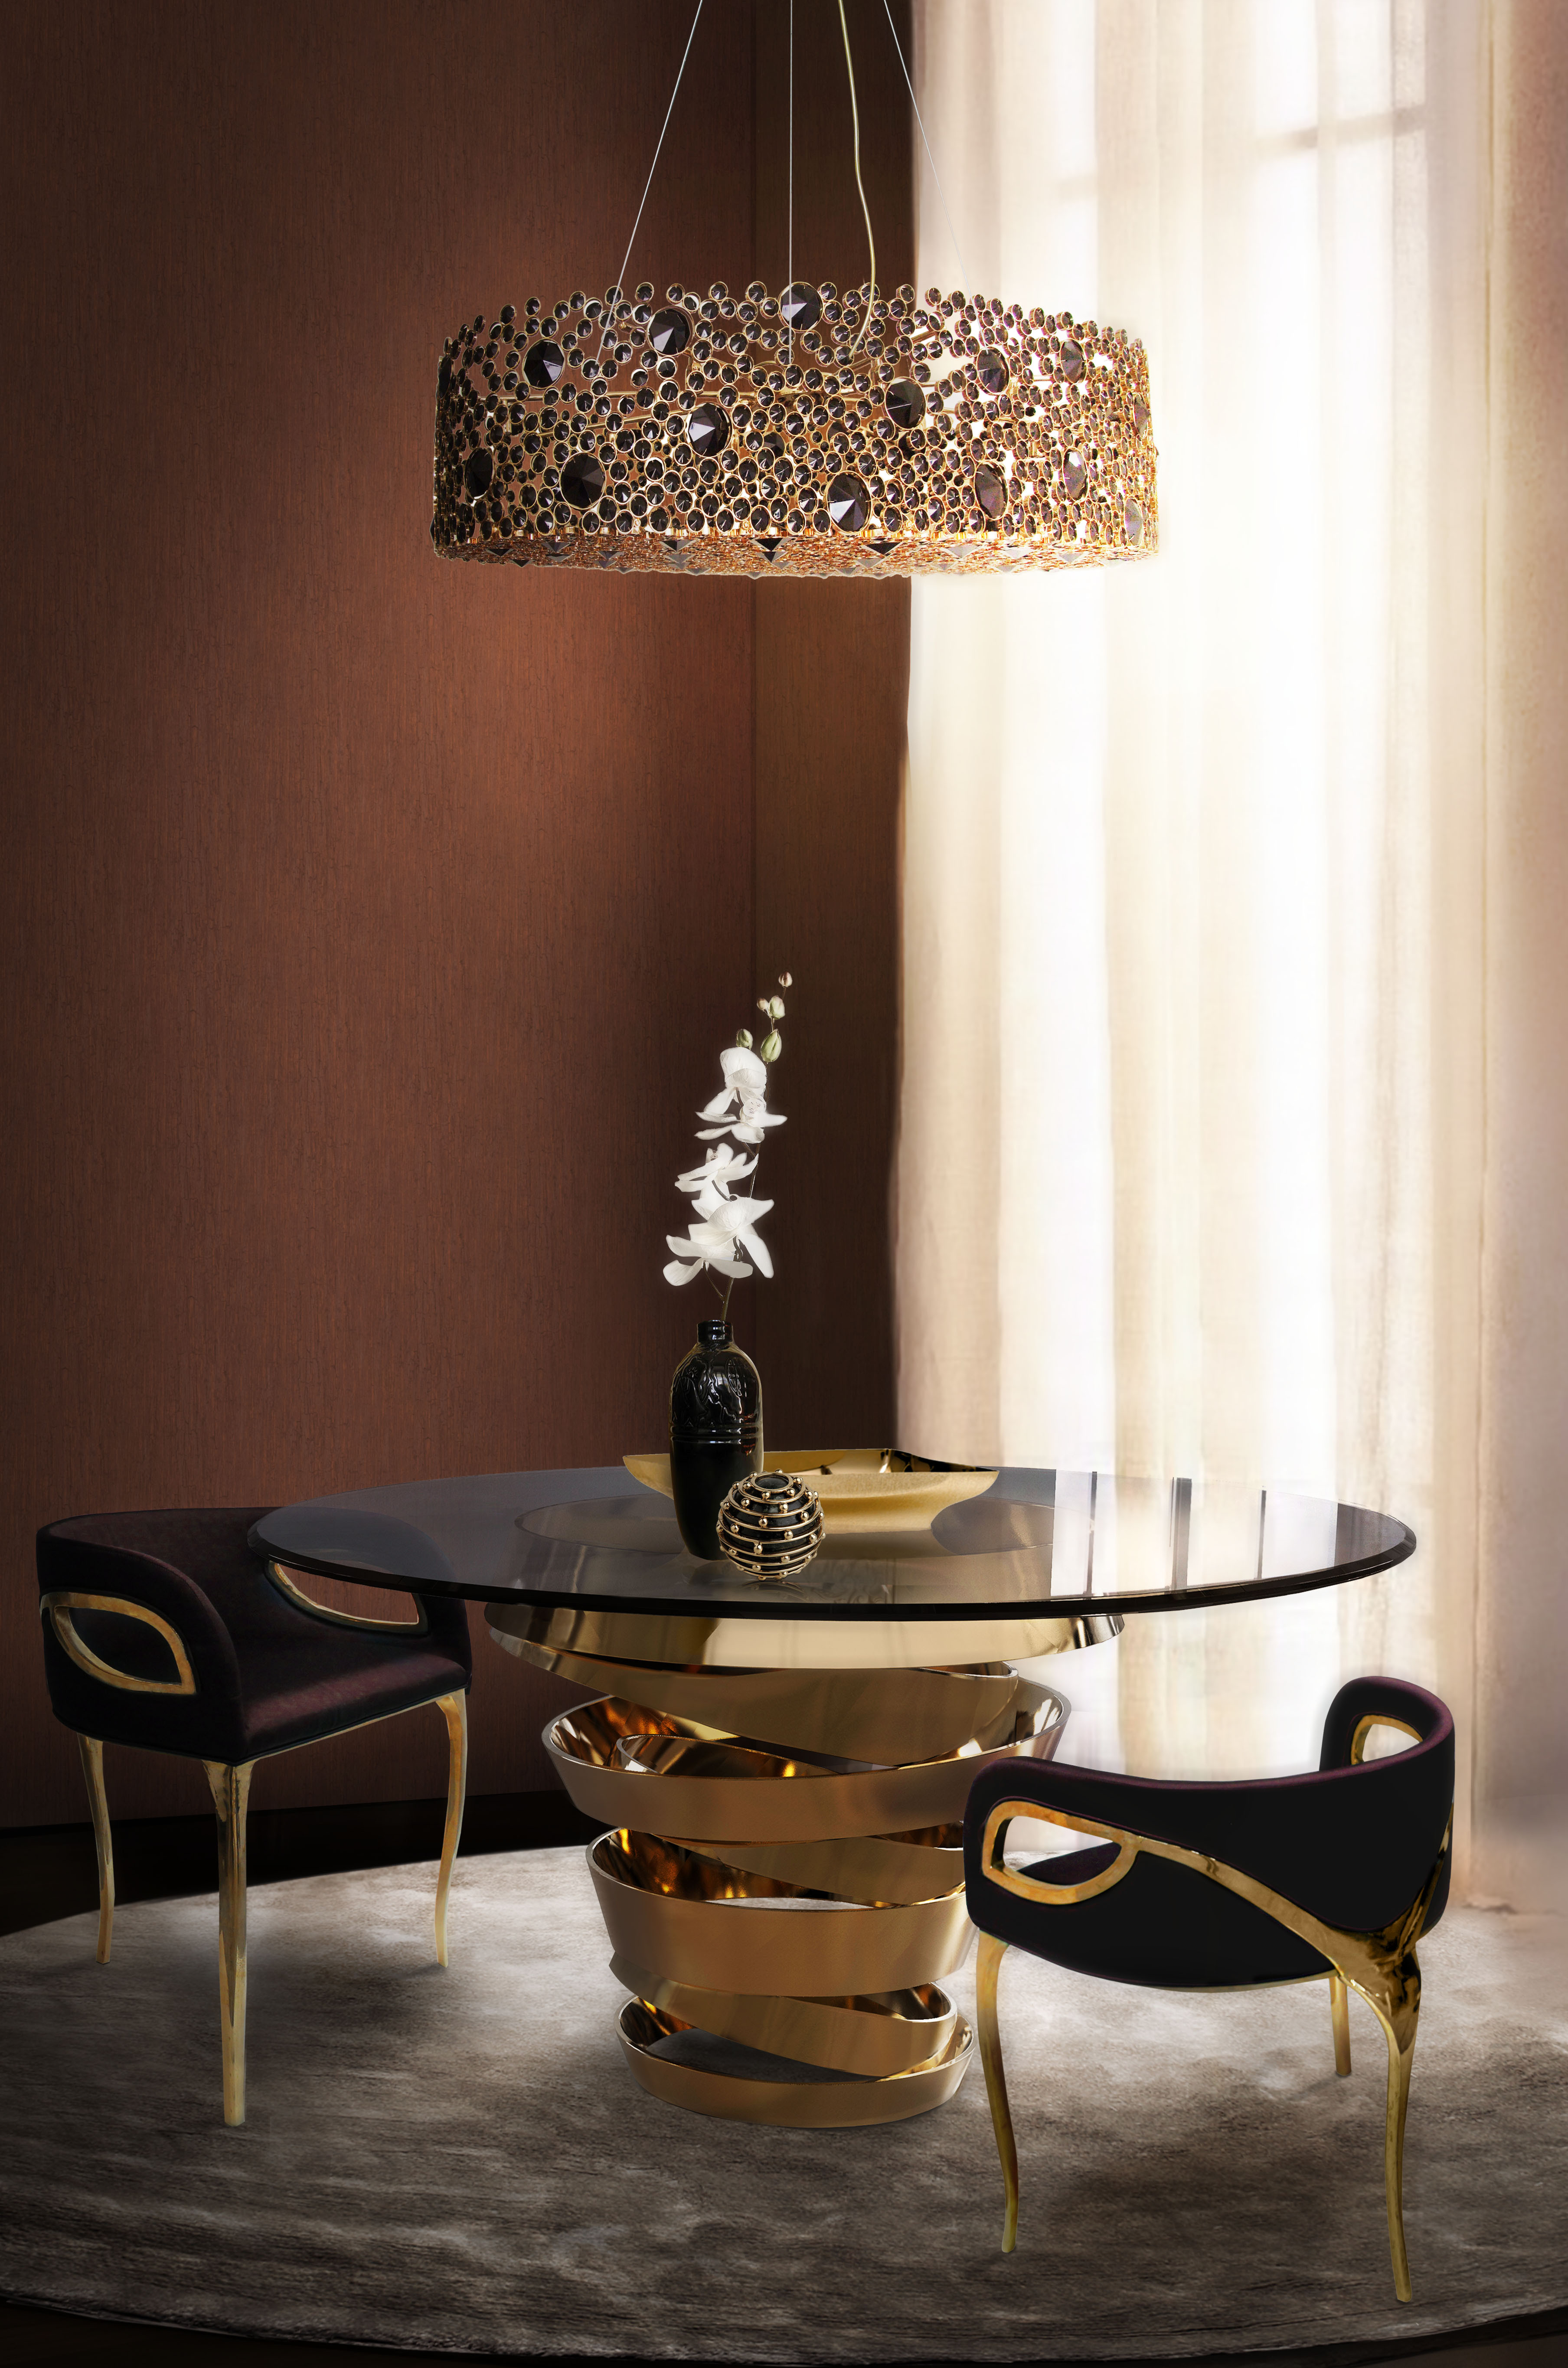 Black and Gold Dining Room Ideas the Best Black and Gold Decorating Ideas for Your Dining Room